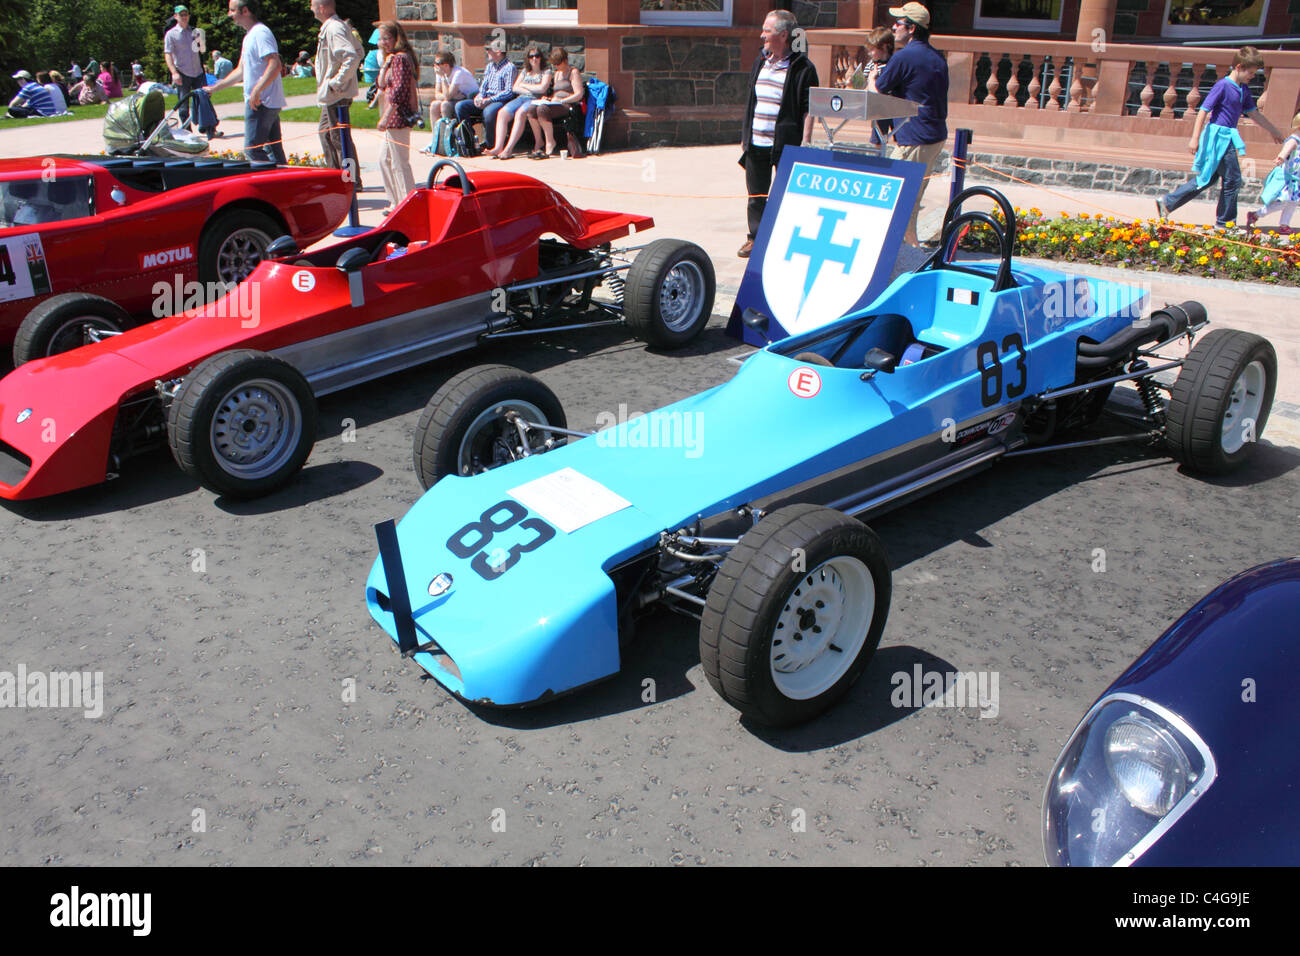 Crossle racecars on display at the 2011 Cultra Hillclimb Event, County Down, Northern Ireland, UK Stock Photo